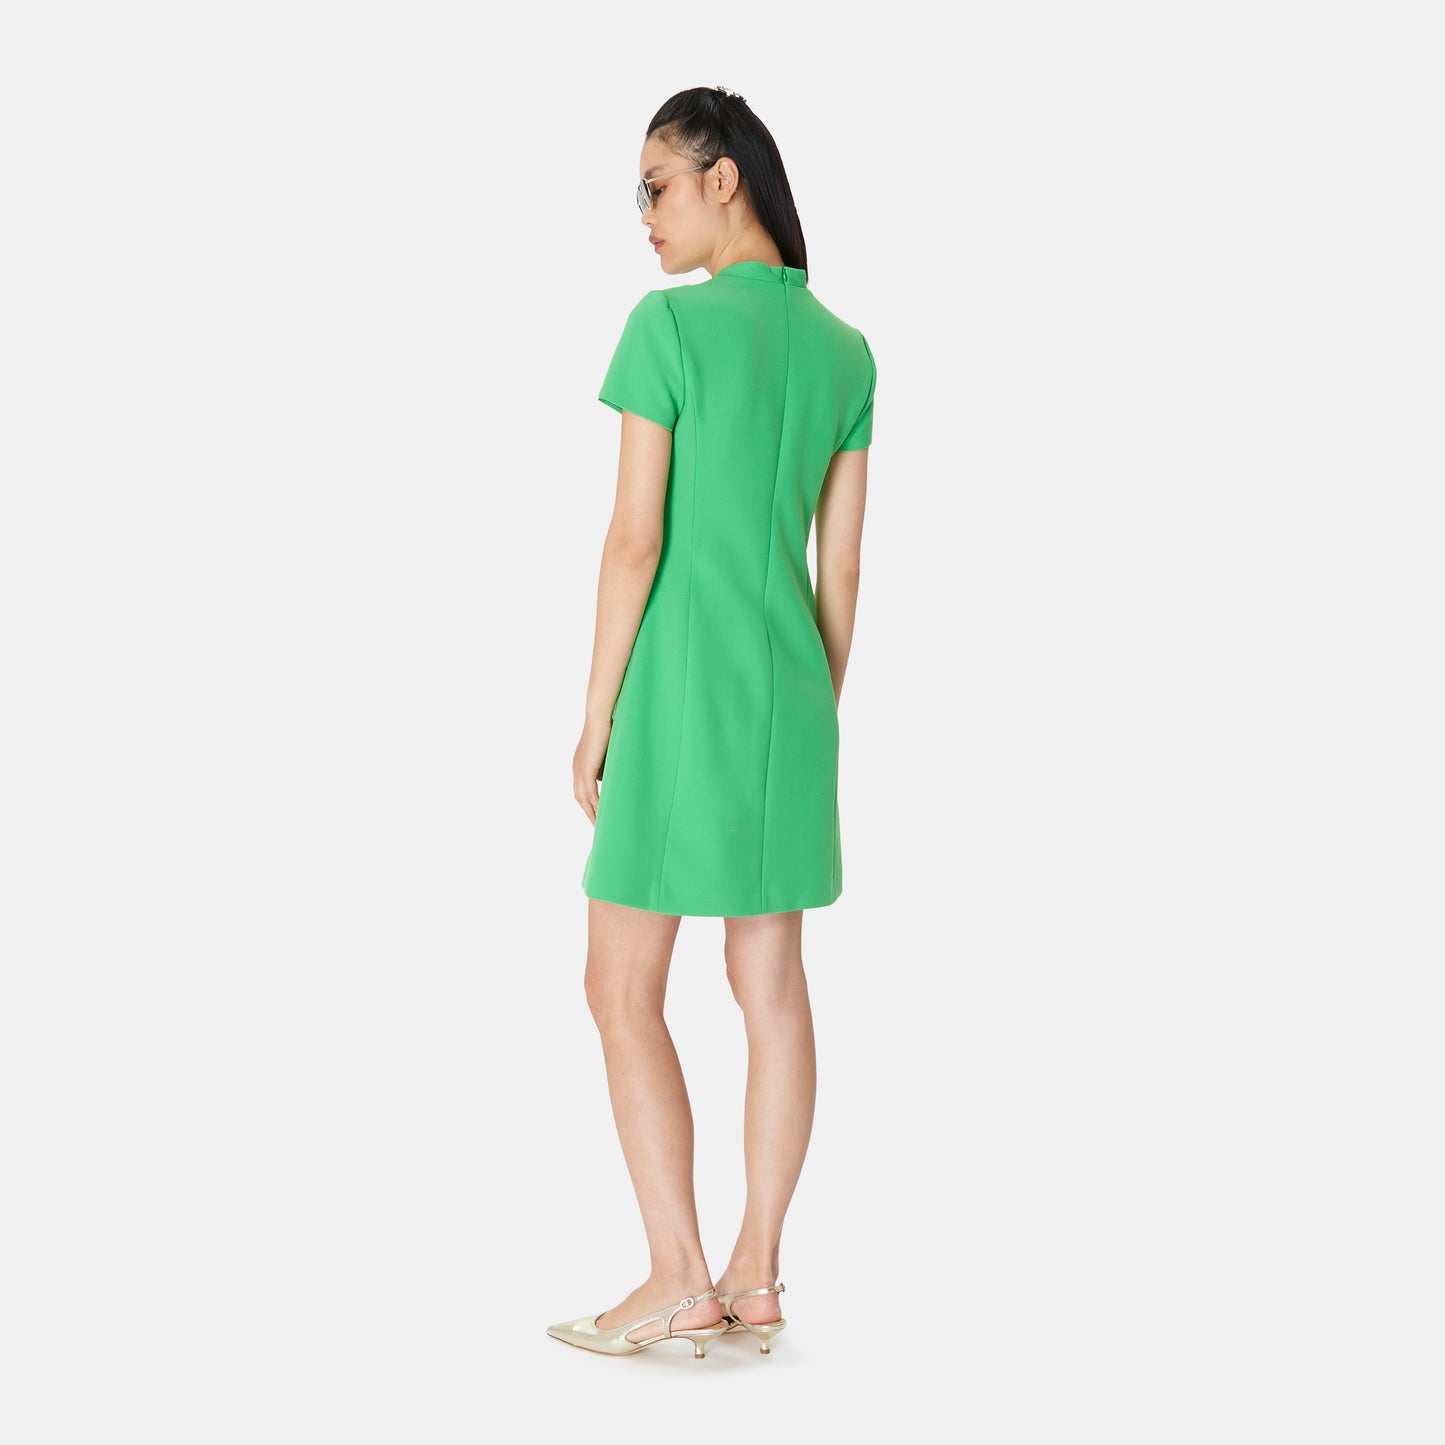 Green Shift Dress With Cap Sleeves